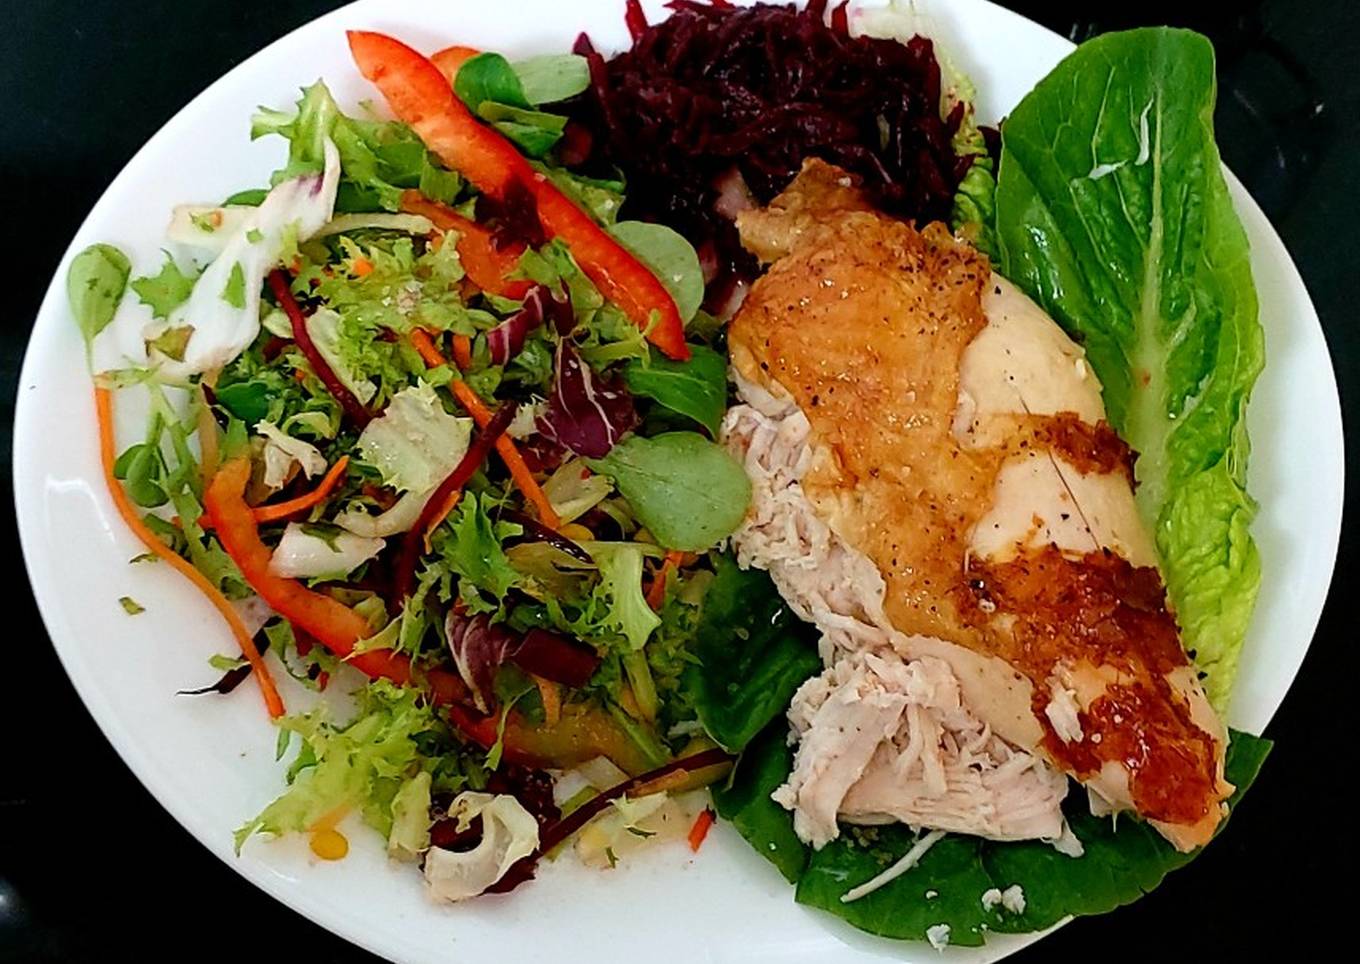 my roast chicken with rainbow salad and smoked sweet beetroot